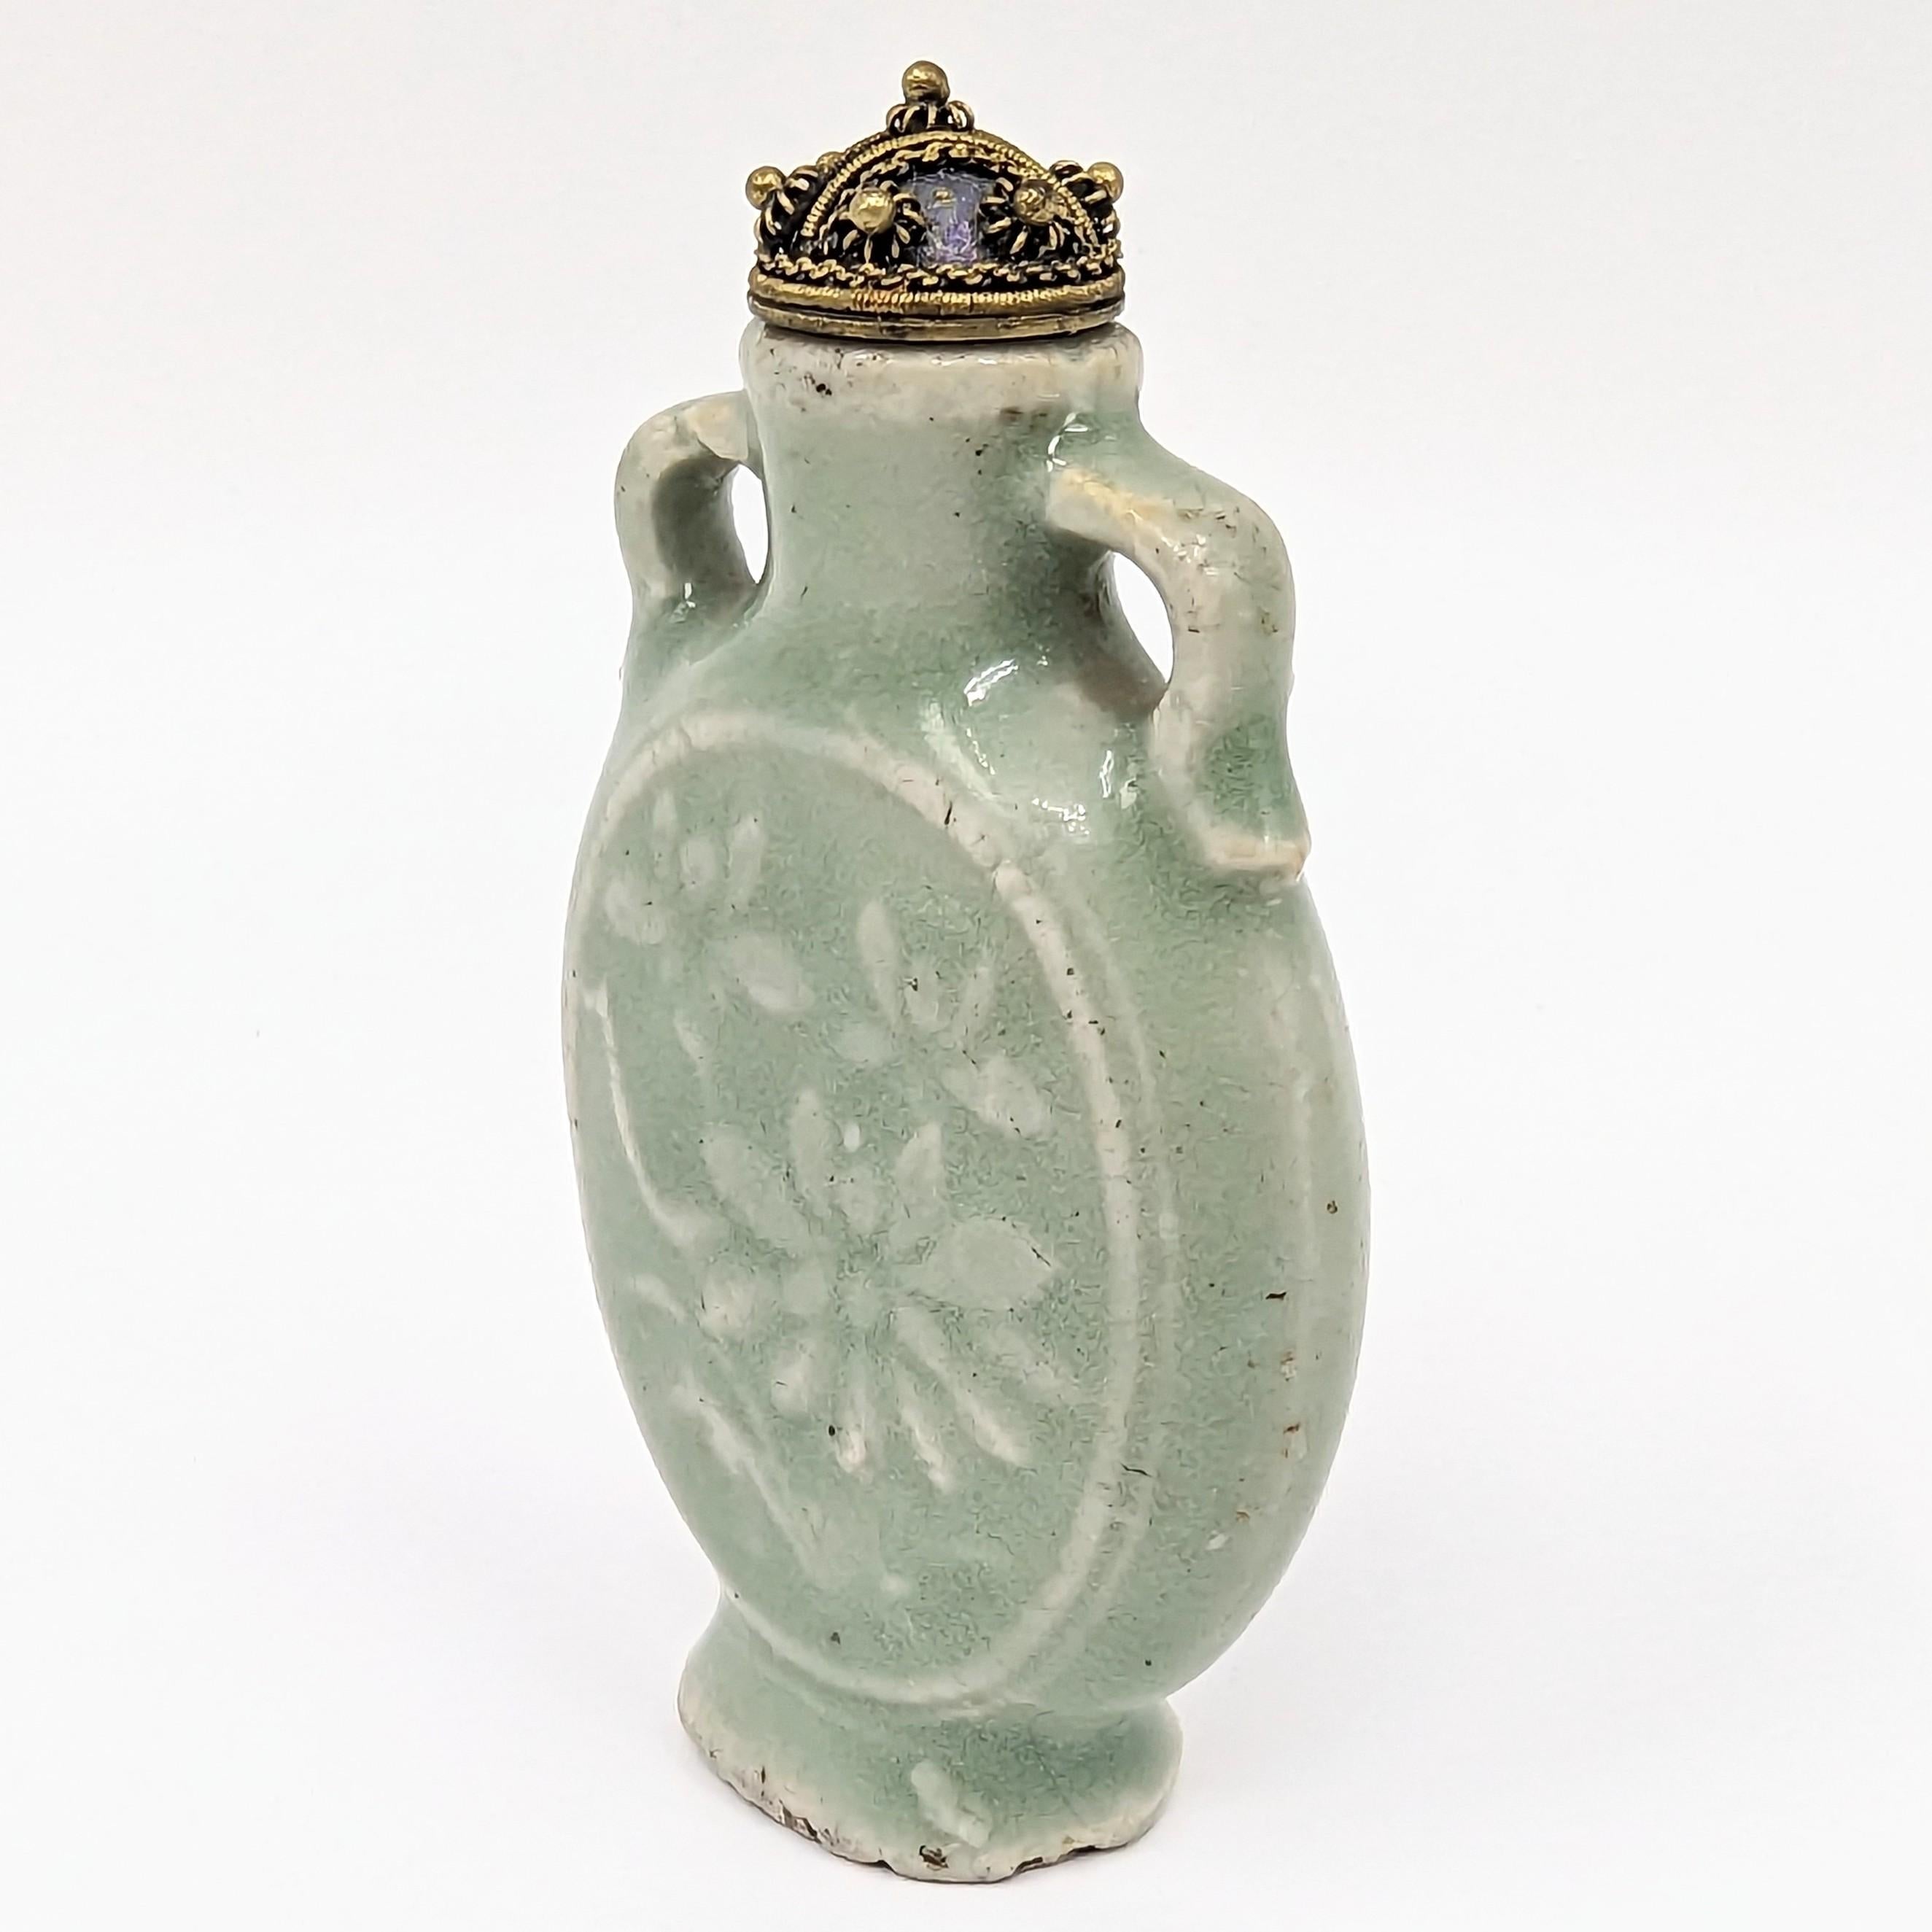 Antique Chinese Longquan celadon glazed porcelain snuff bottle with carved medallions of blooms and foliage in low relief, raised on a flared flat base, with stopper and spoon

19th Century, Qing Dynasty